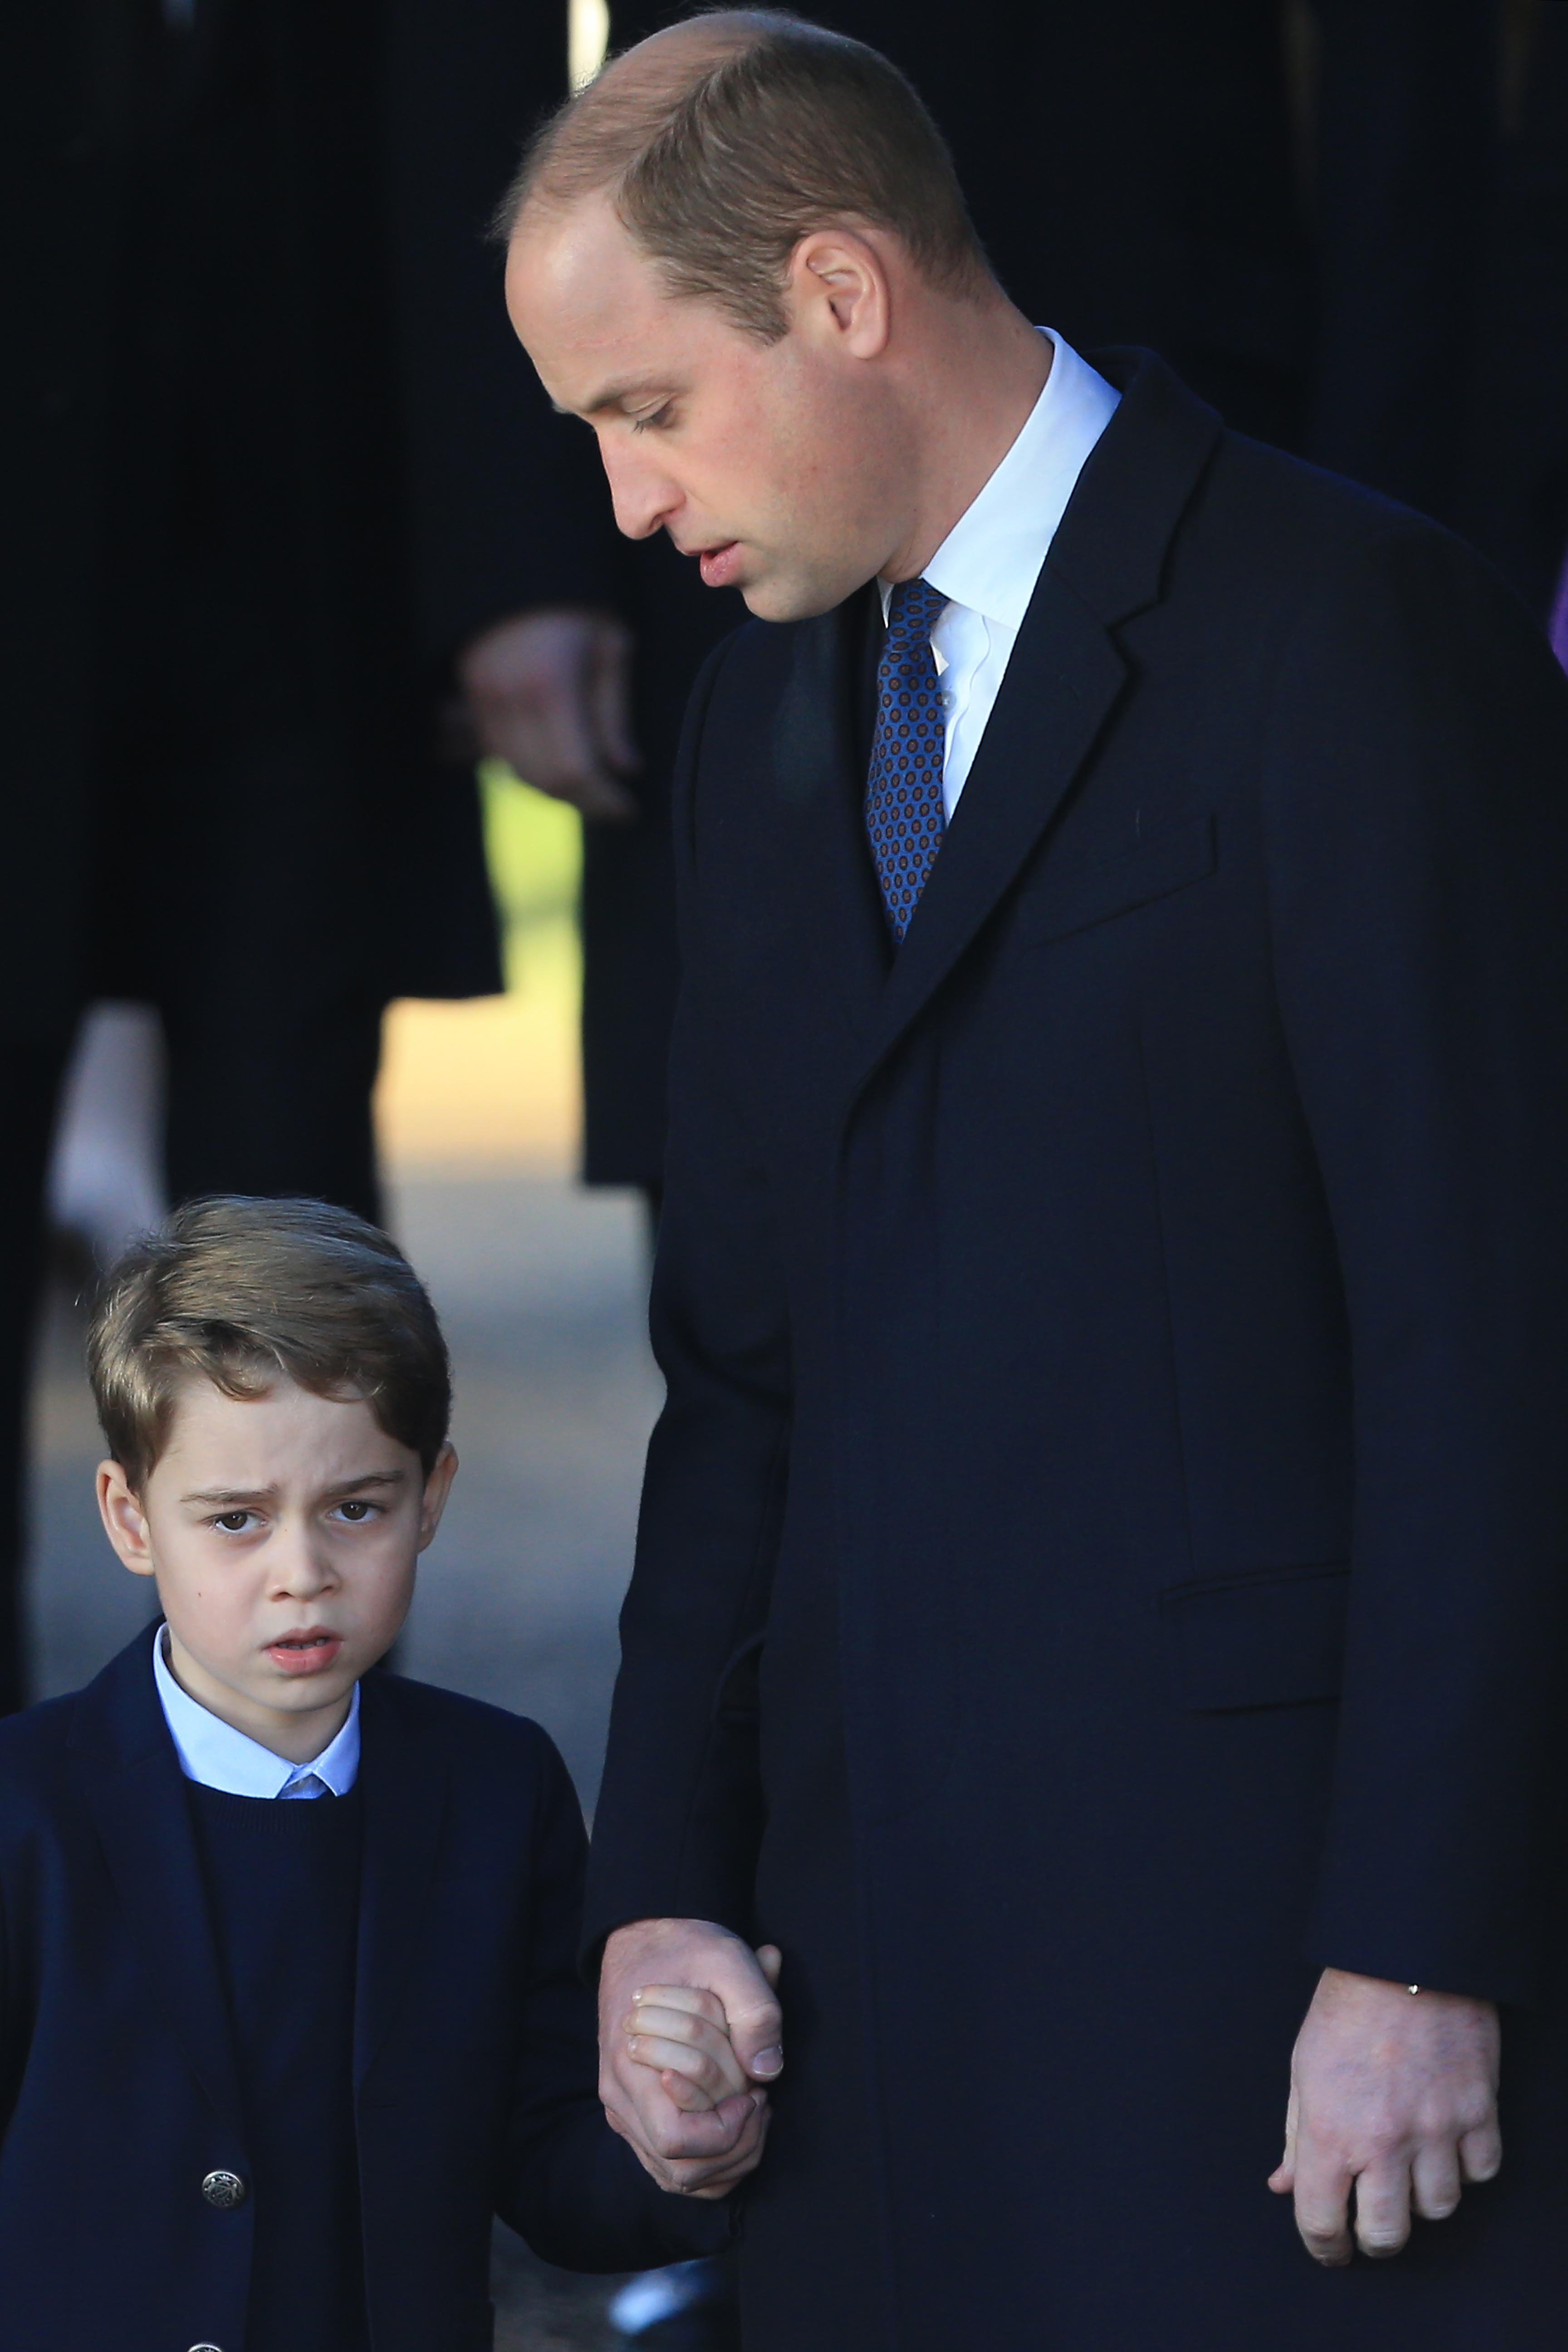 Prince William and Prince George attend the Christmas Day Church Service in King's Lynn, United Kingdom on December 25, 2019 | Photo: Getty Images